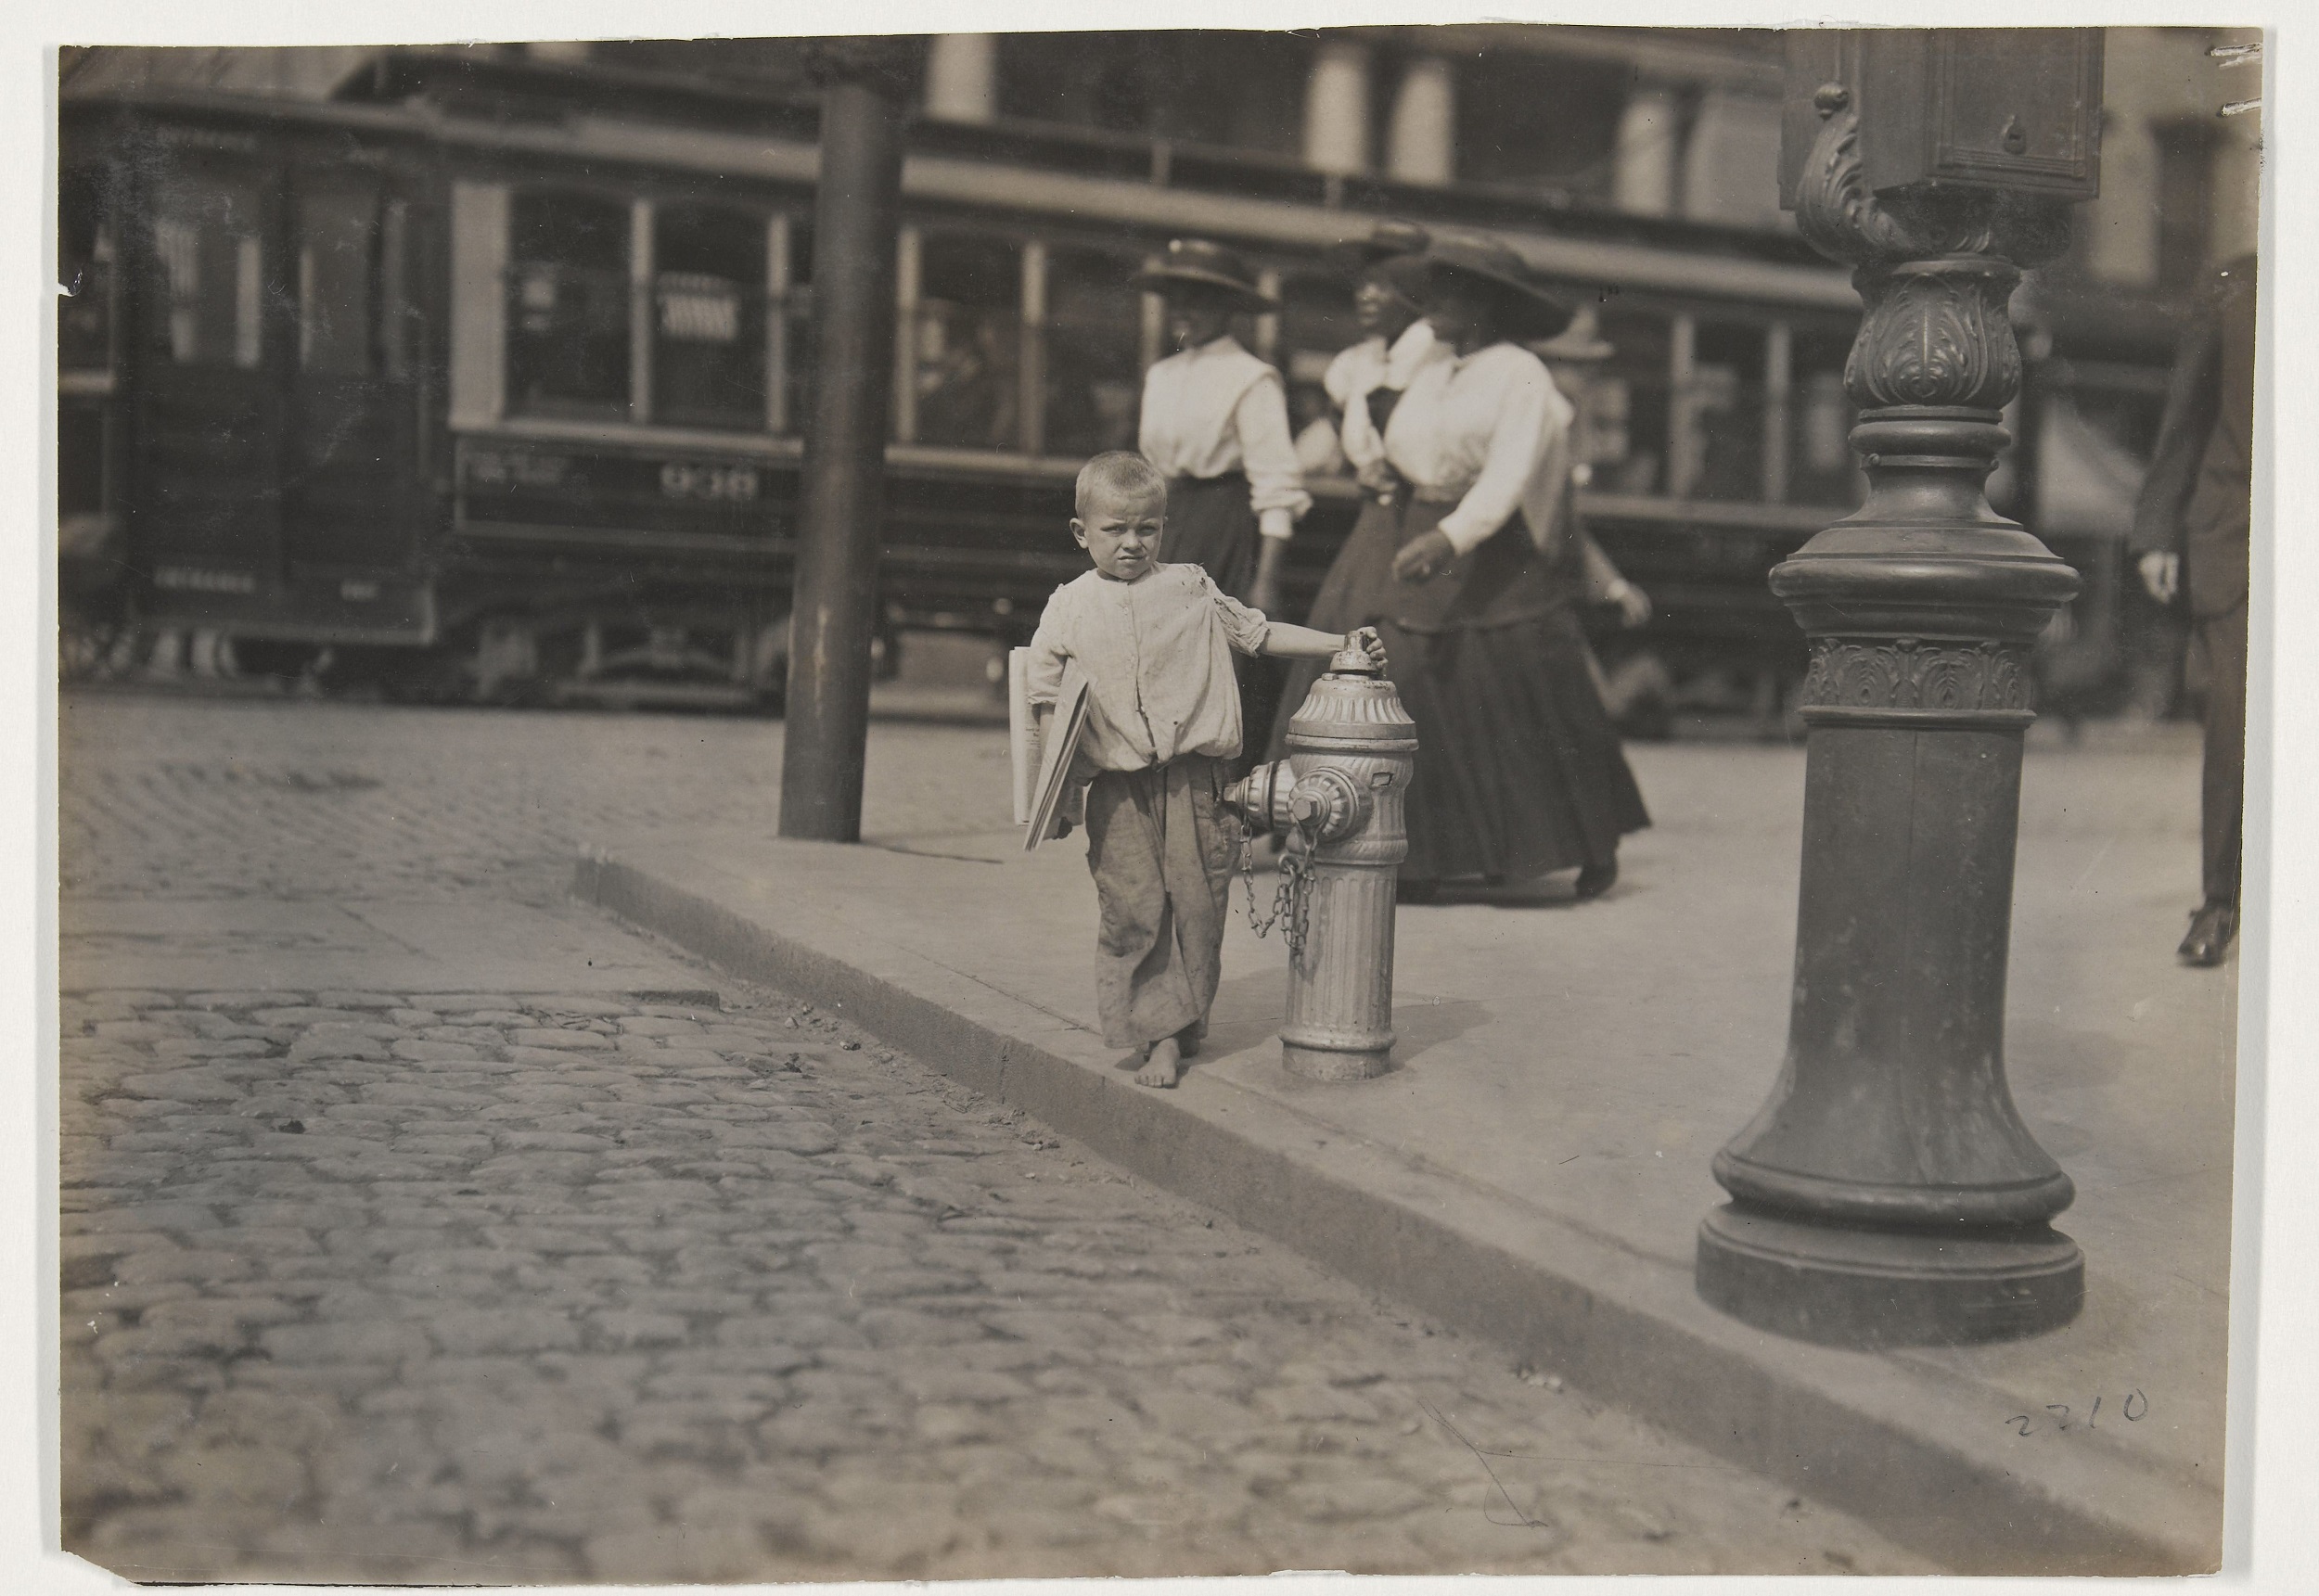 Black-and-white photograph of a young blond boy with newspapers under his arm, standing on a street corner. In the background, three Black women in hats, white shirts, and dark skirts prepare to cross the street.